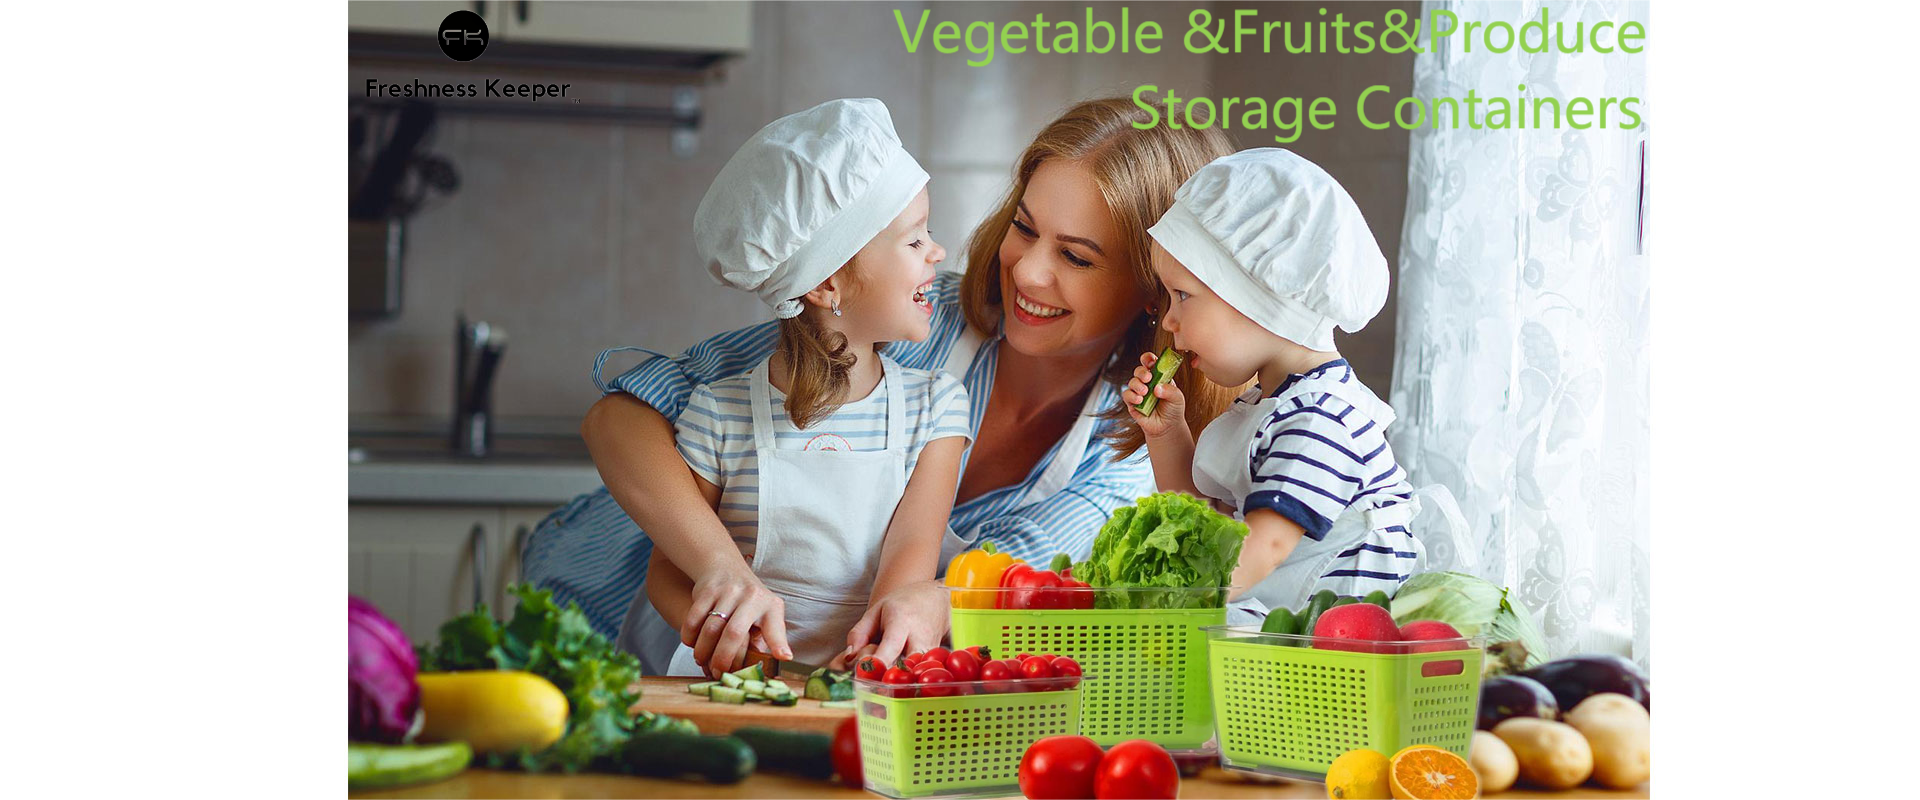 Vegetable Storage Containers 11